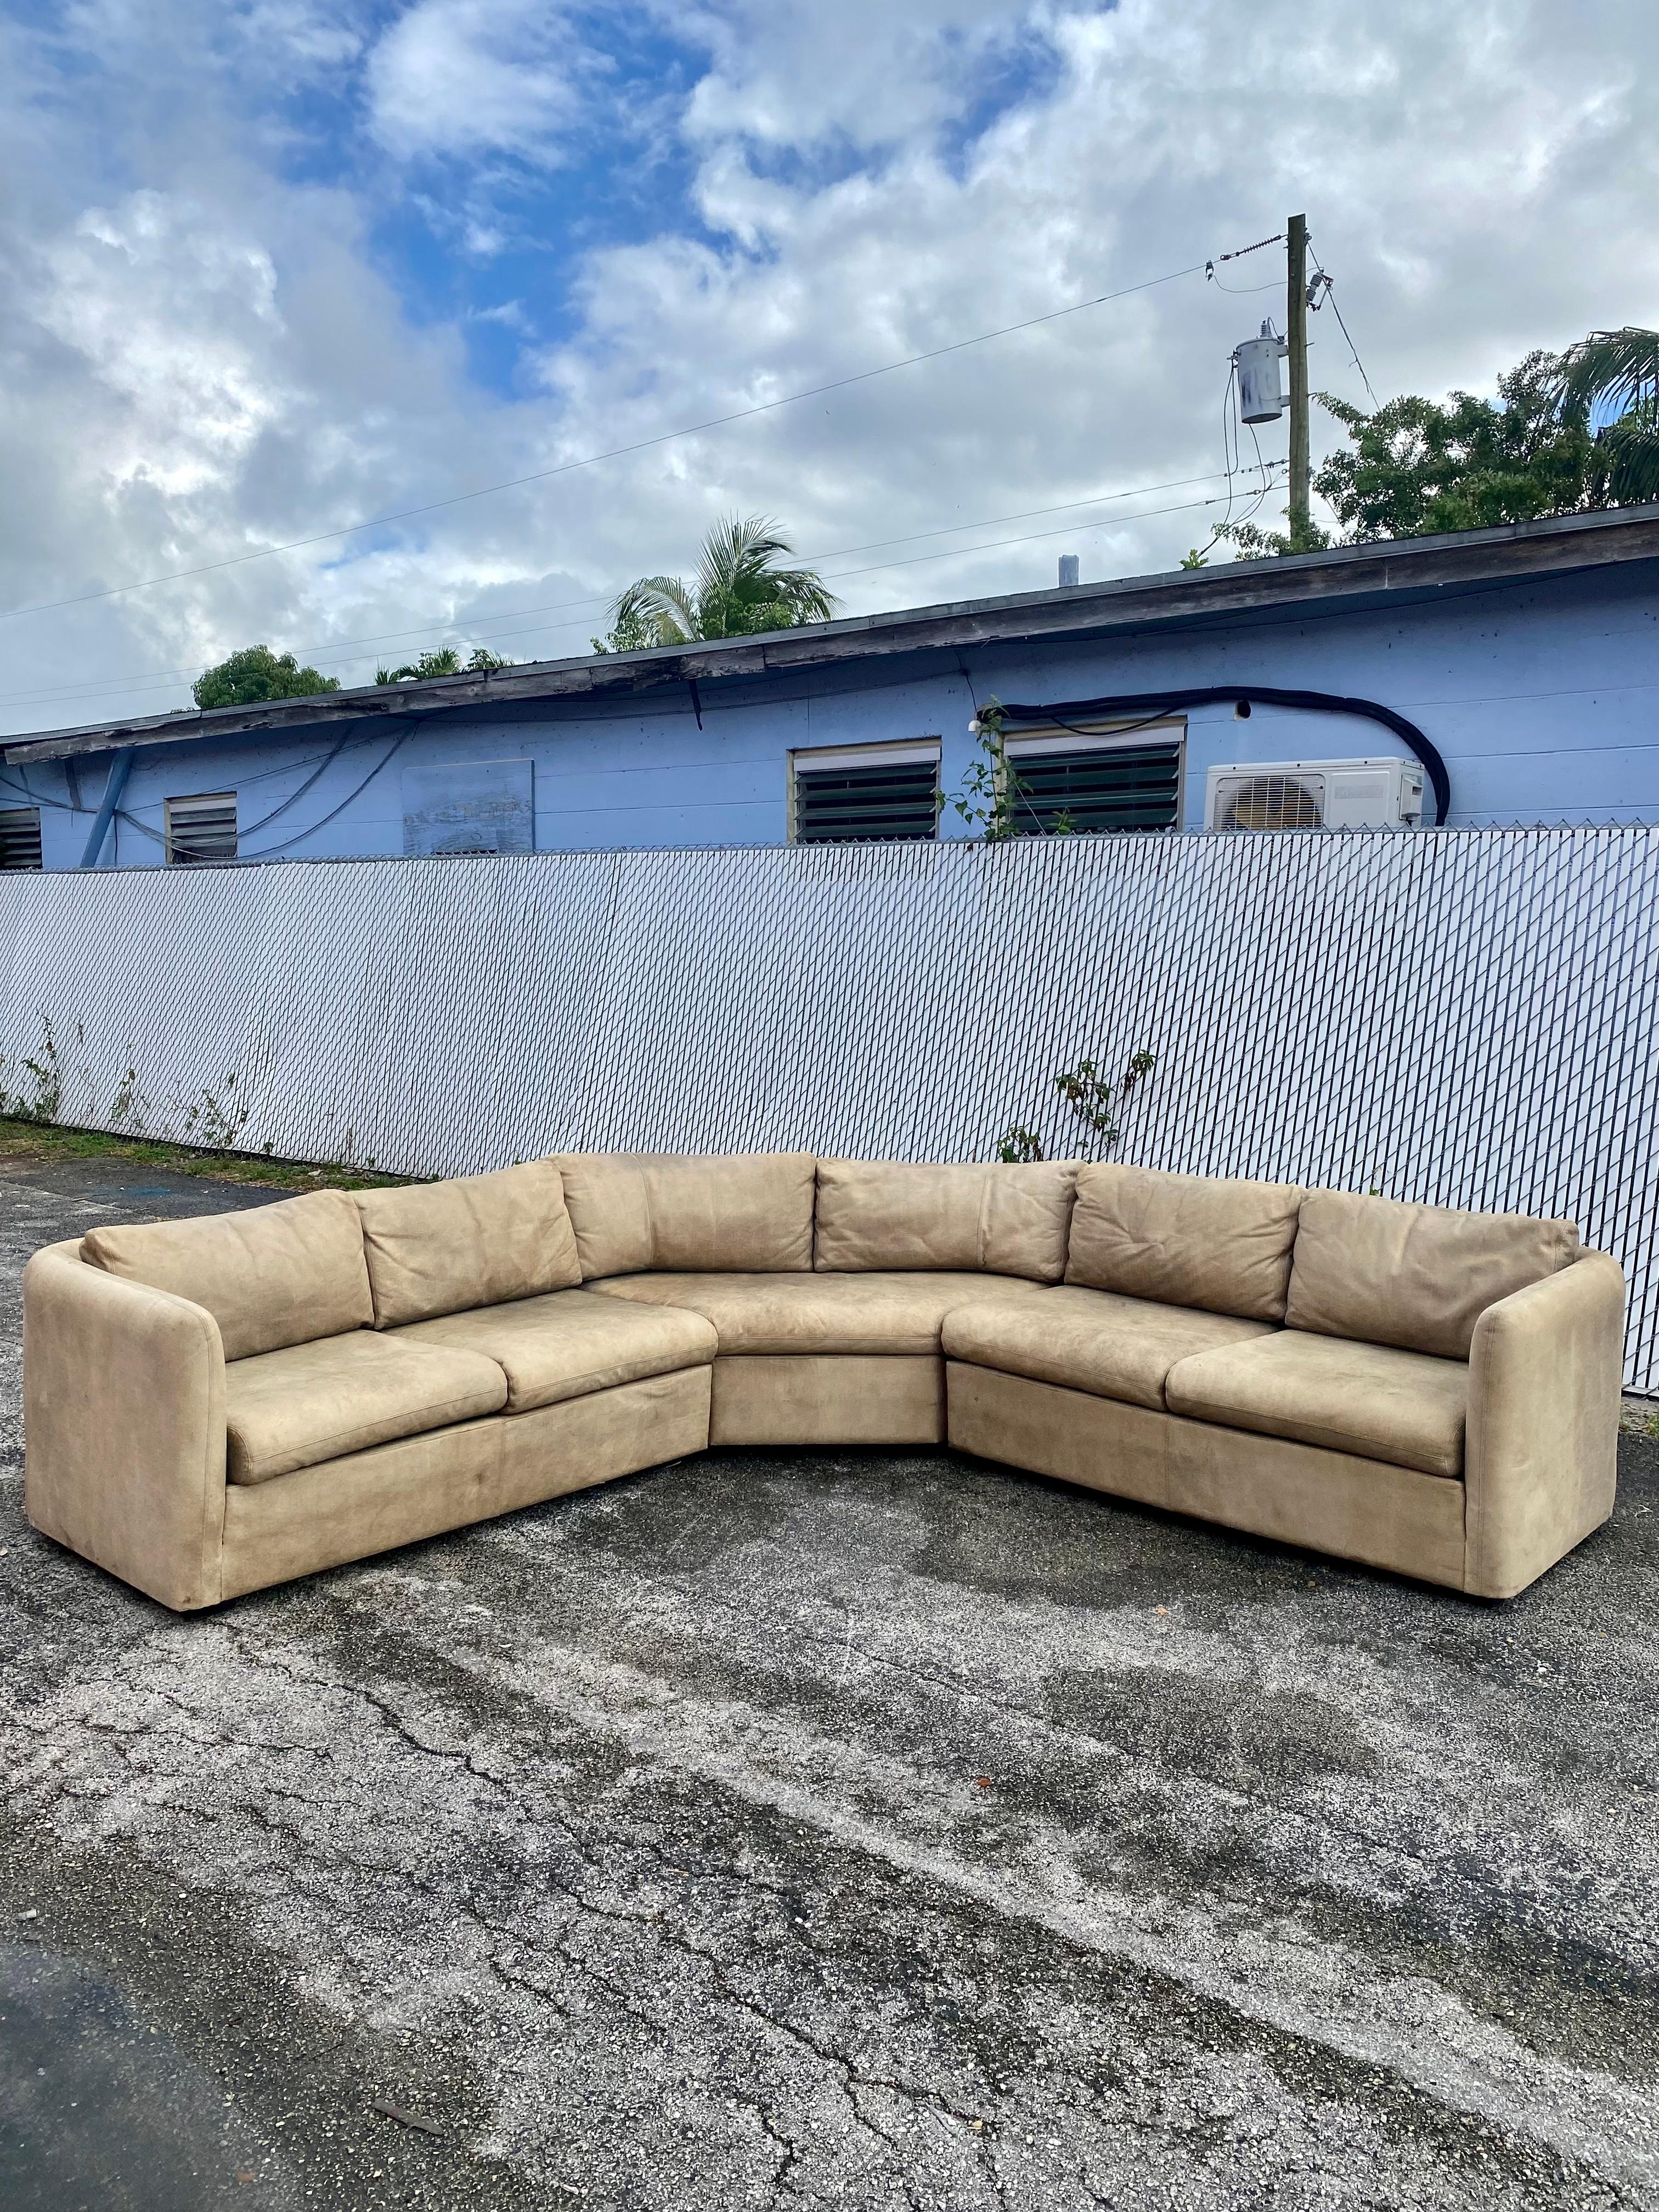 On offer on this occasion is one of the most stunning, distressed leather, lizard or snake print sectional you could hope to find. This is an ultra-rare opportunity to acquire what is, unequivocally, the best of the best, it being a most spectacular